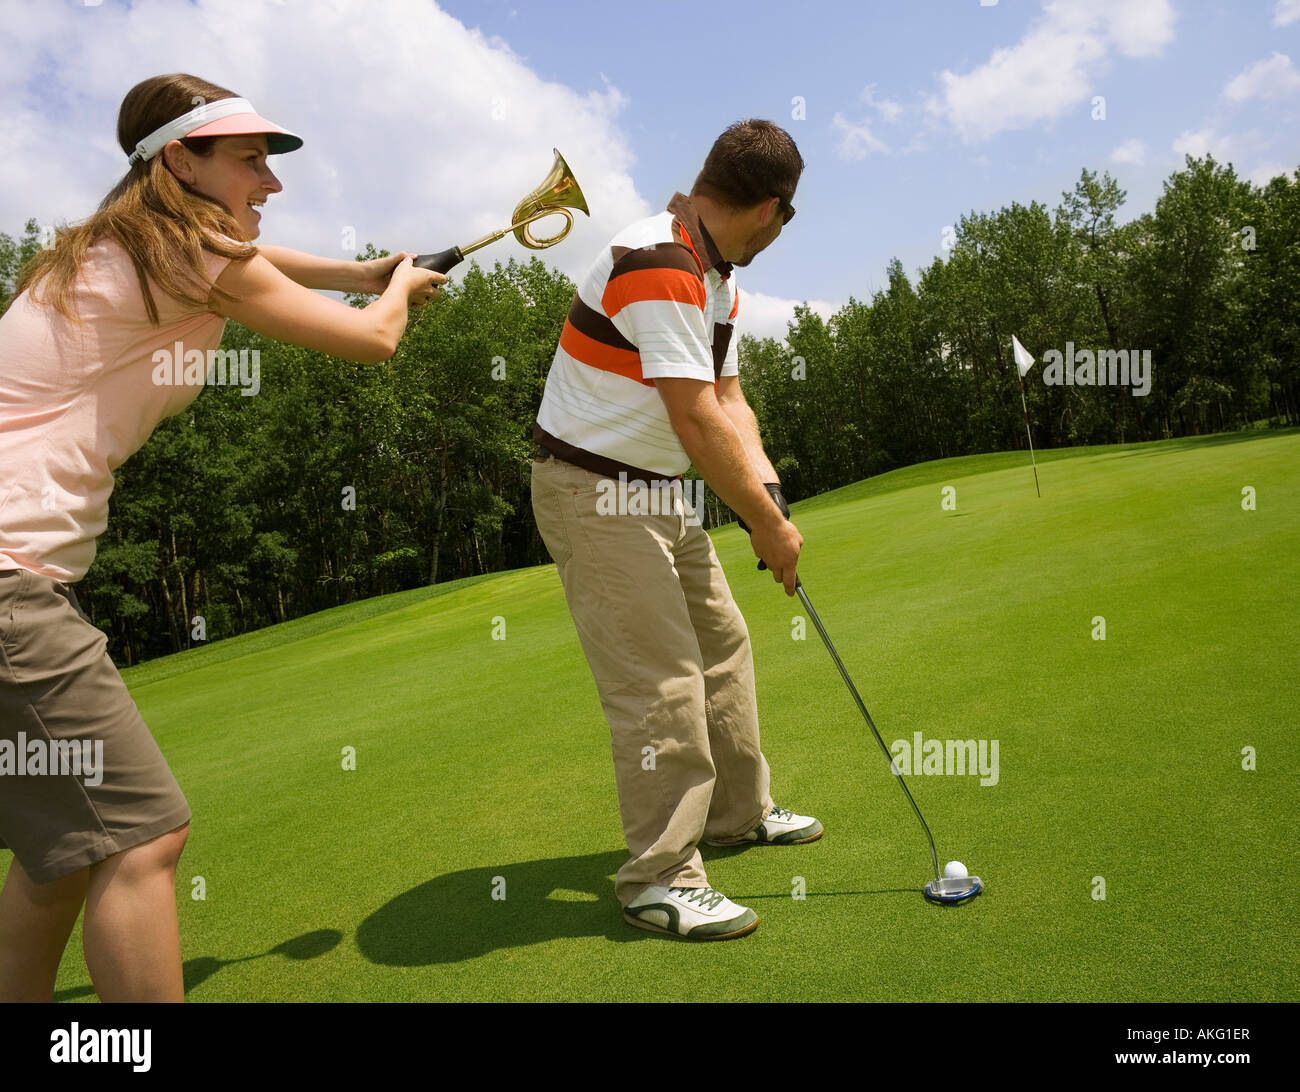 A couple playing golf Stock Photo